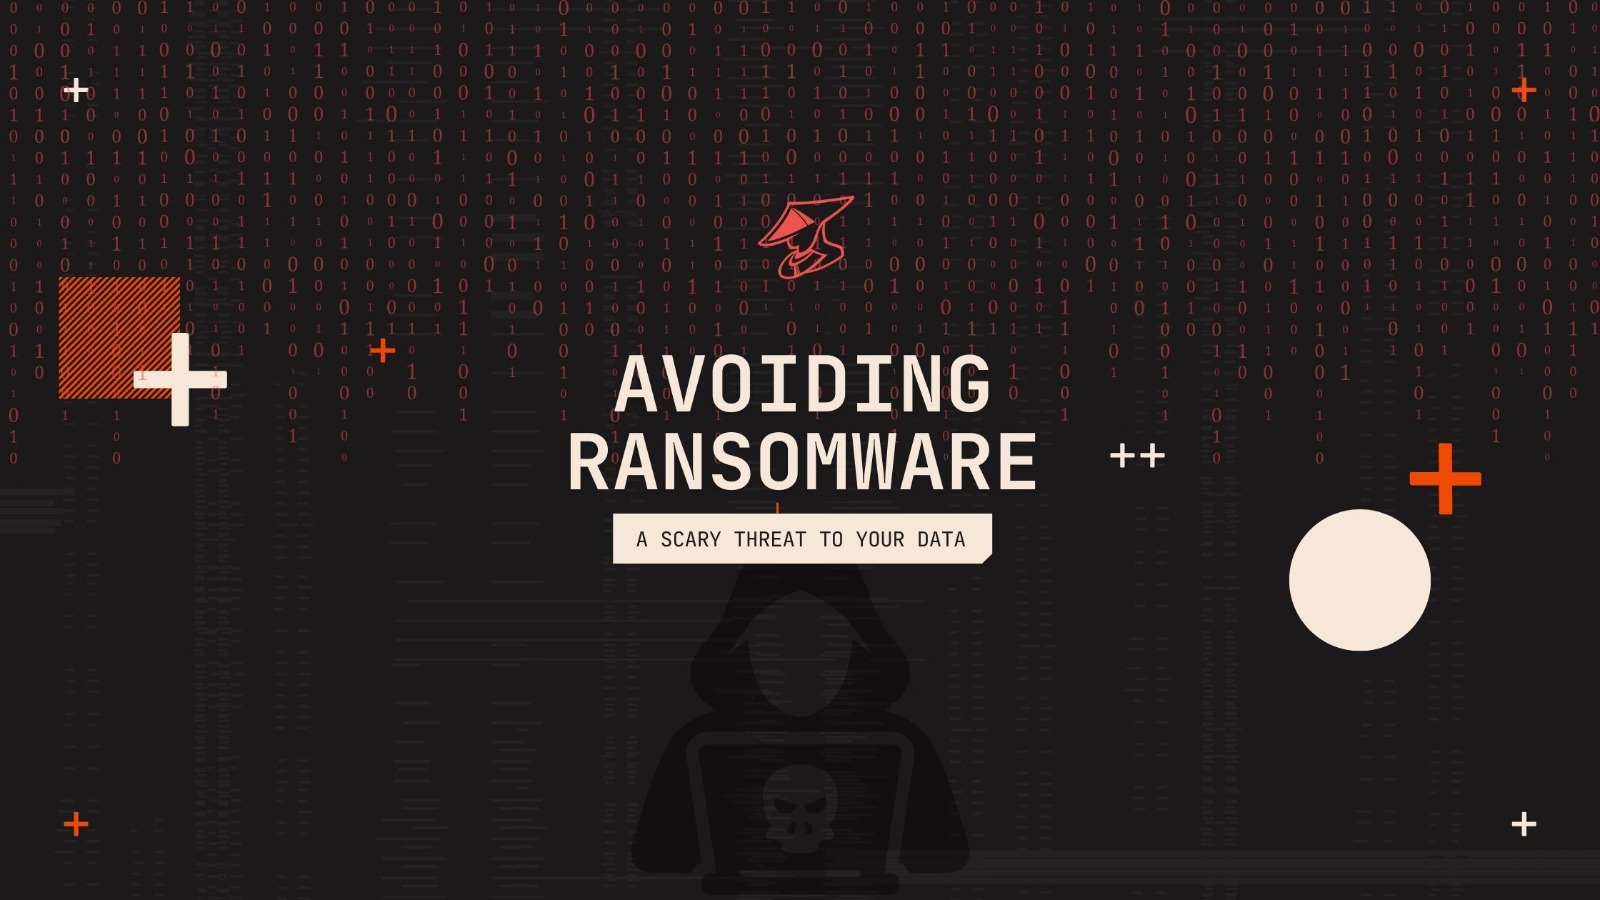 Ronin-Pentest - Stay safe from ransomware